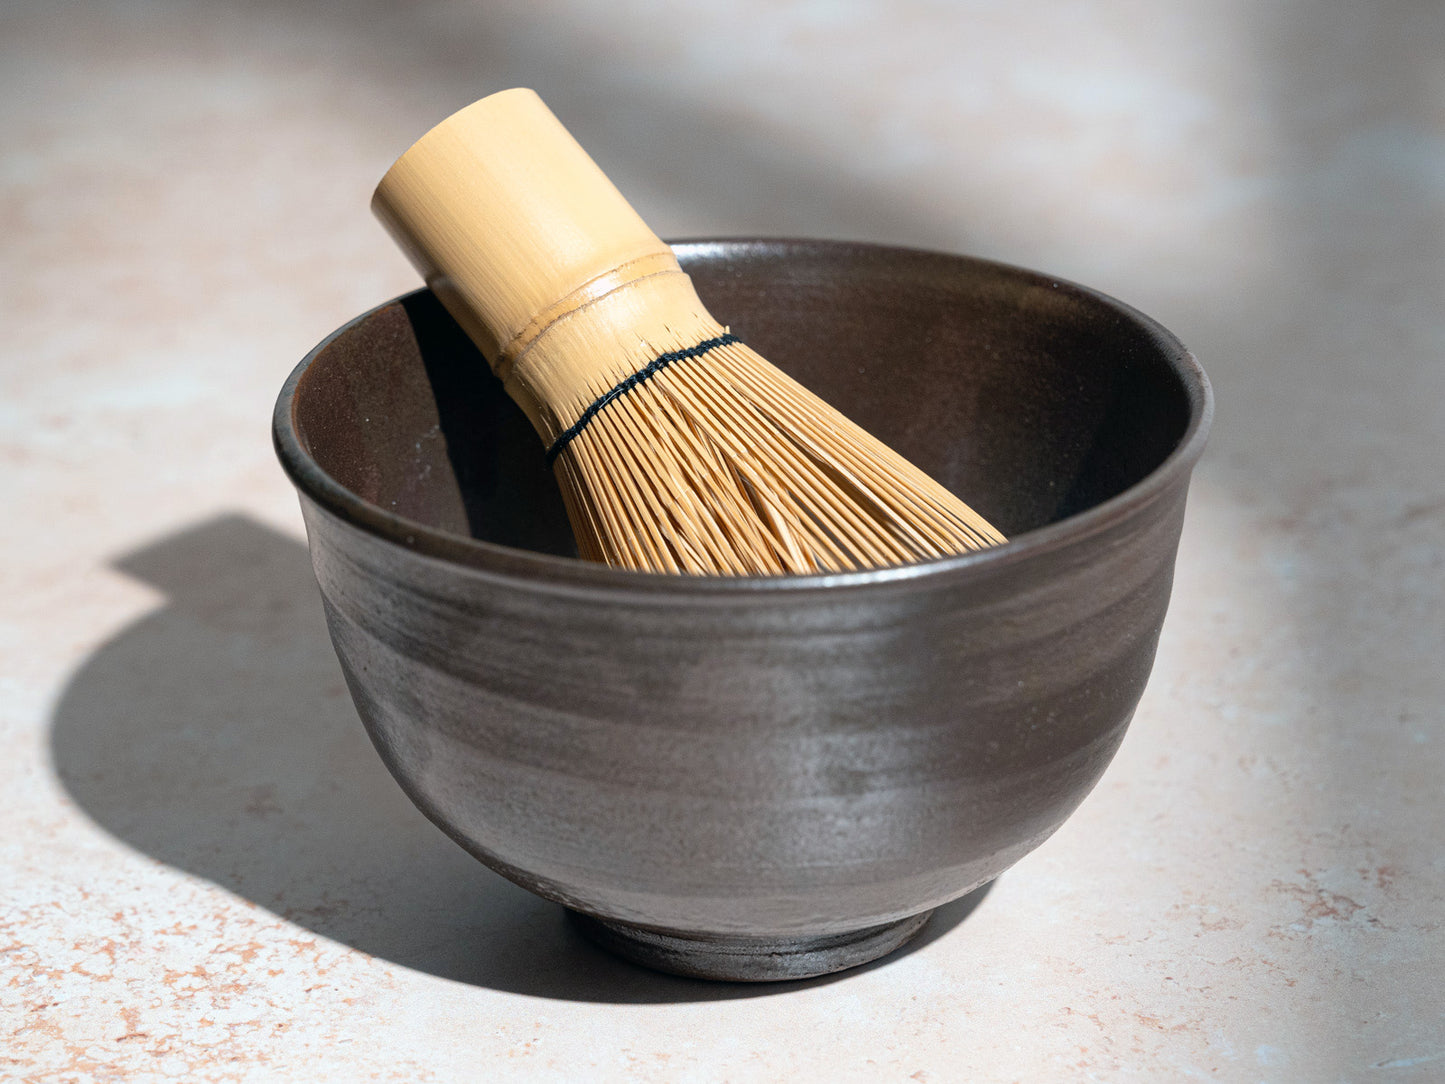 firepot matcha bowl with whisk (chasen) inside